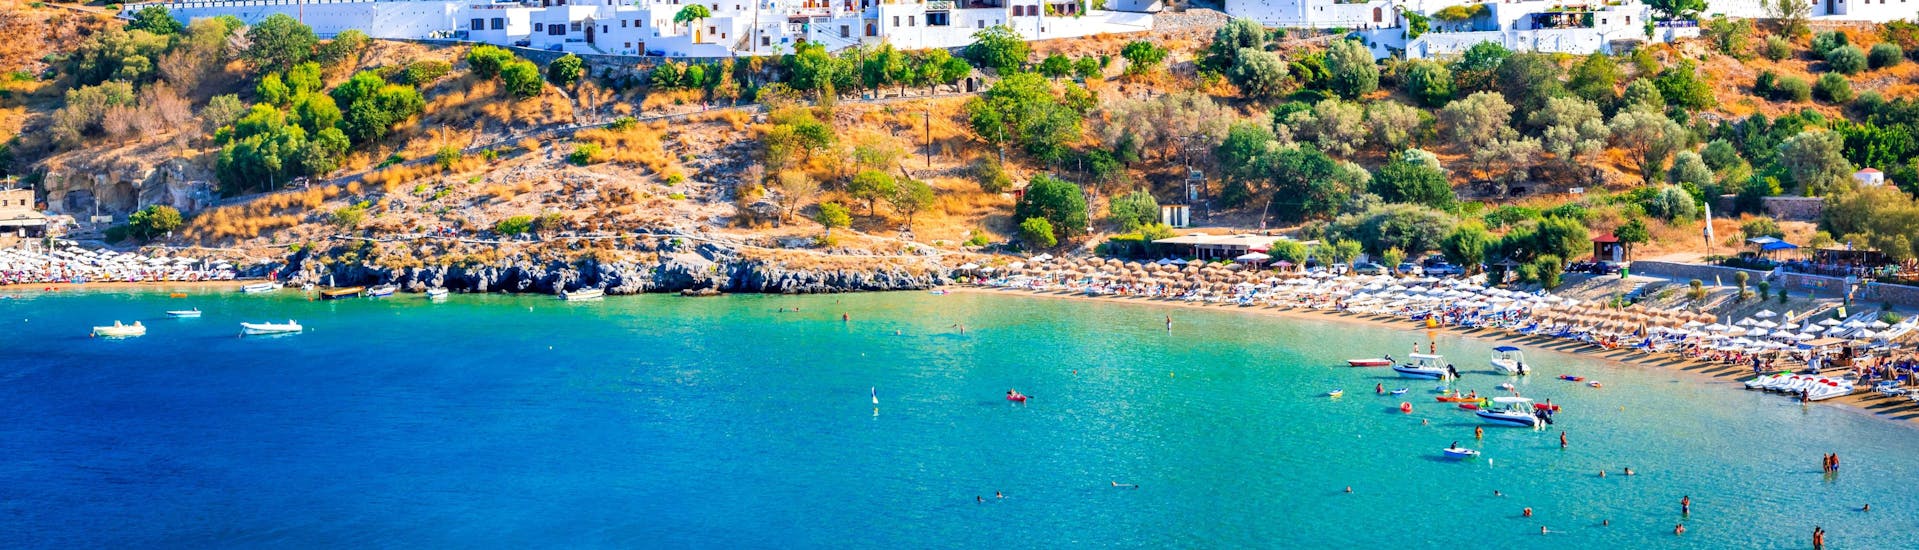 An image of one of the beautiful beaches where you can try jet ski or other water sports in Rhodes.